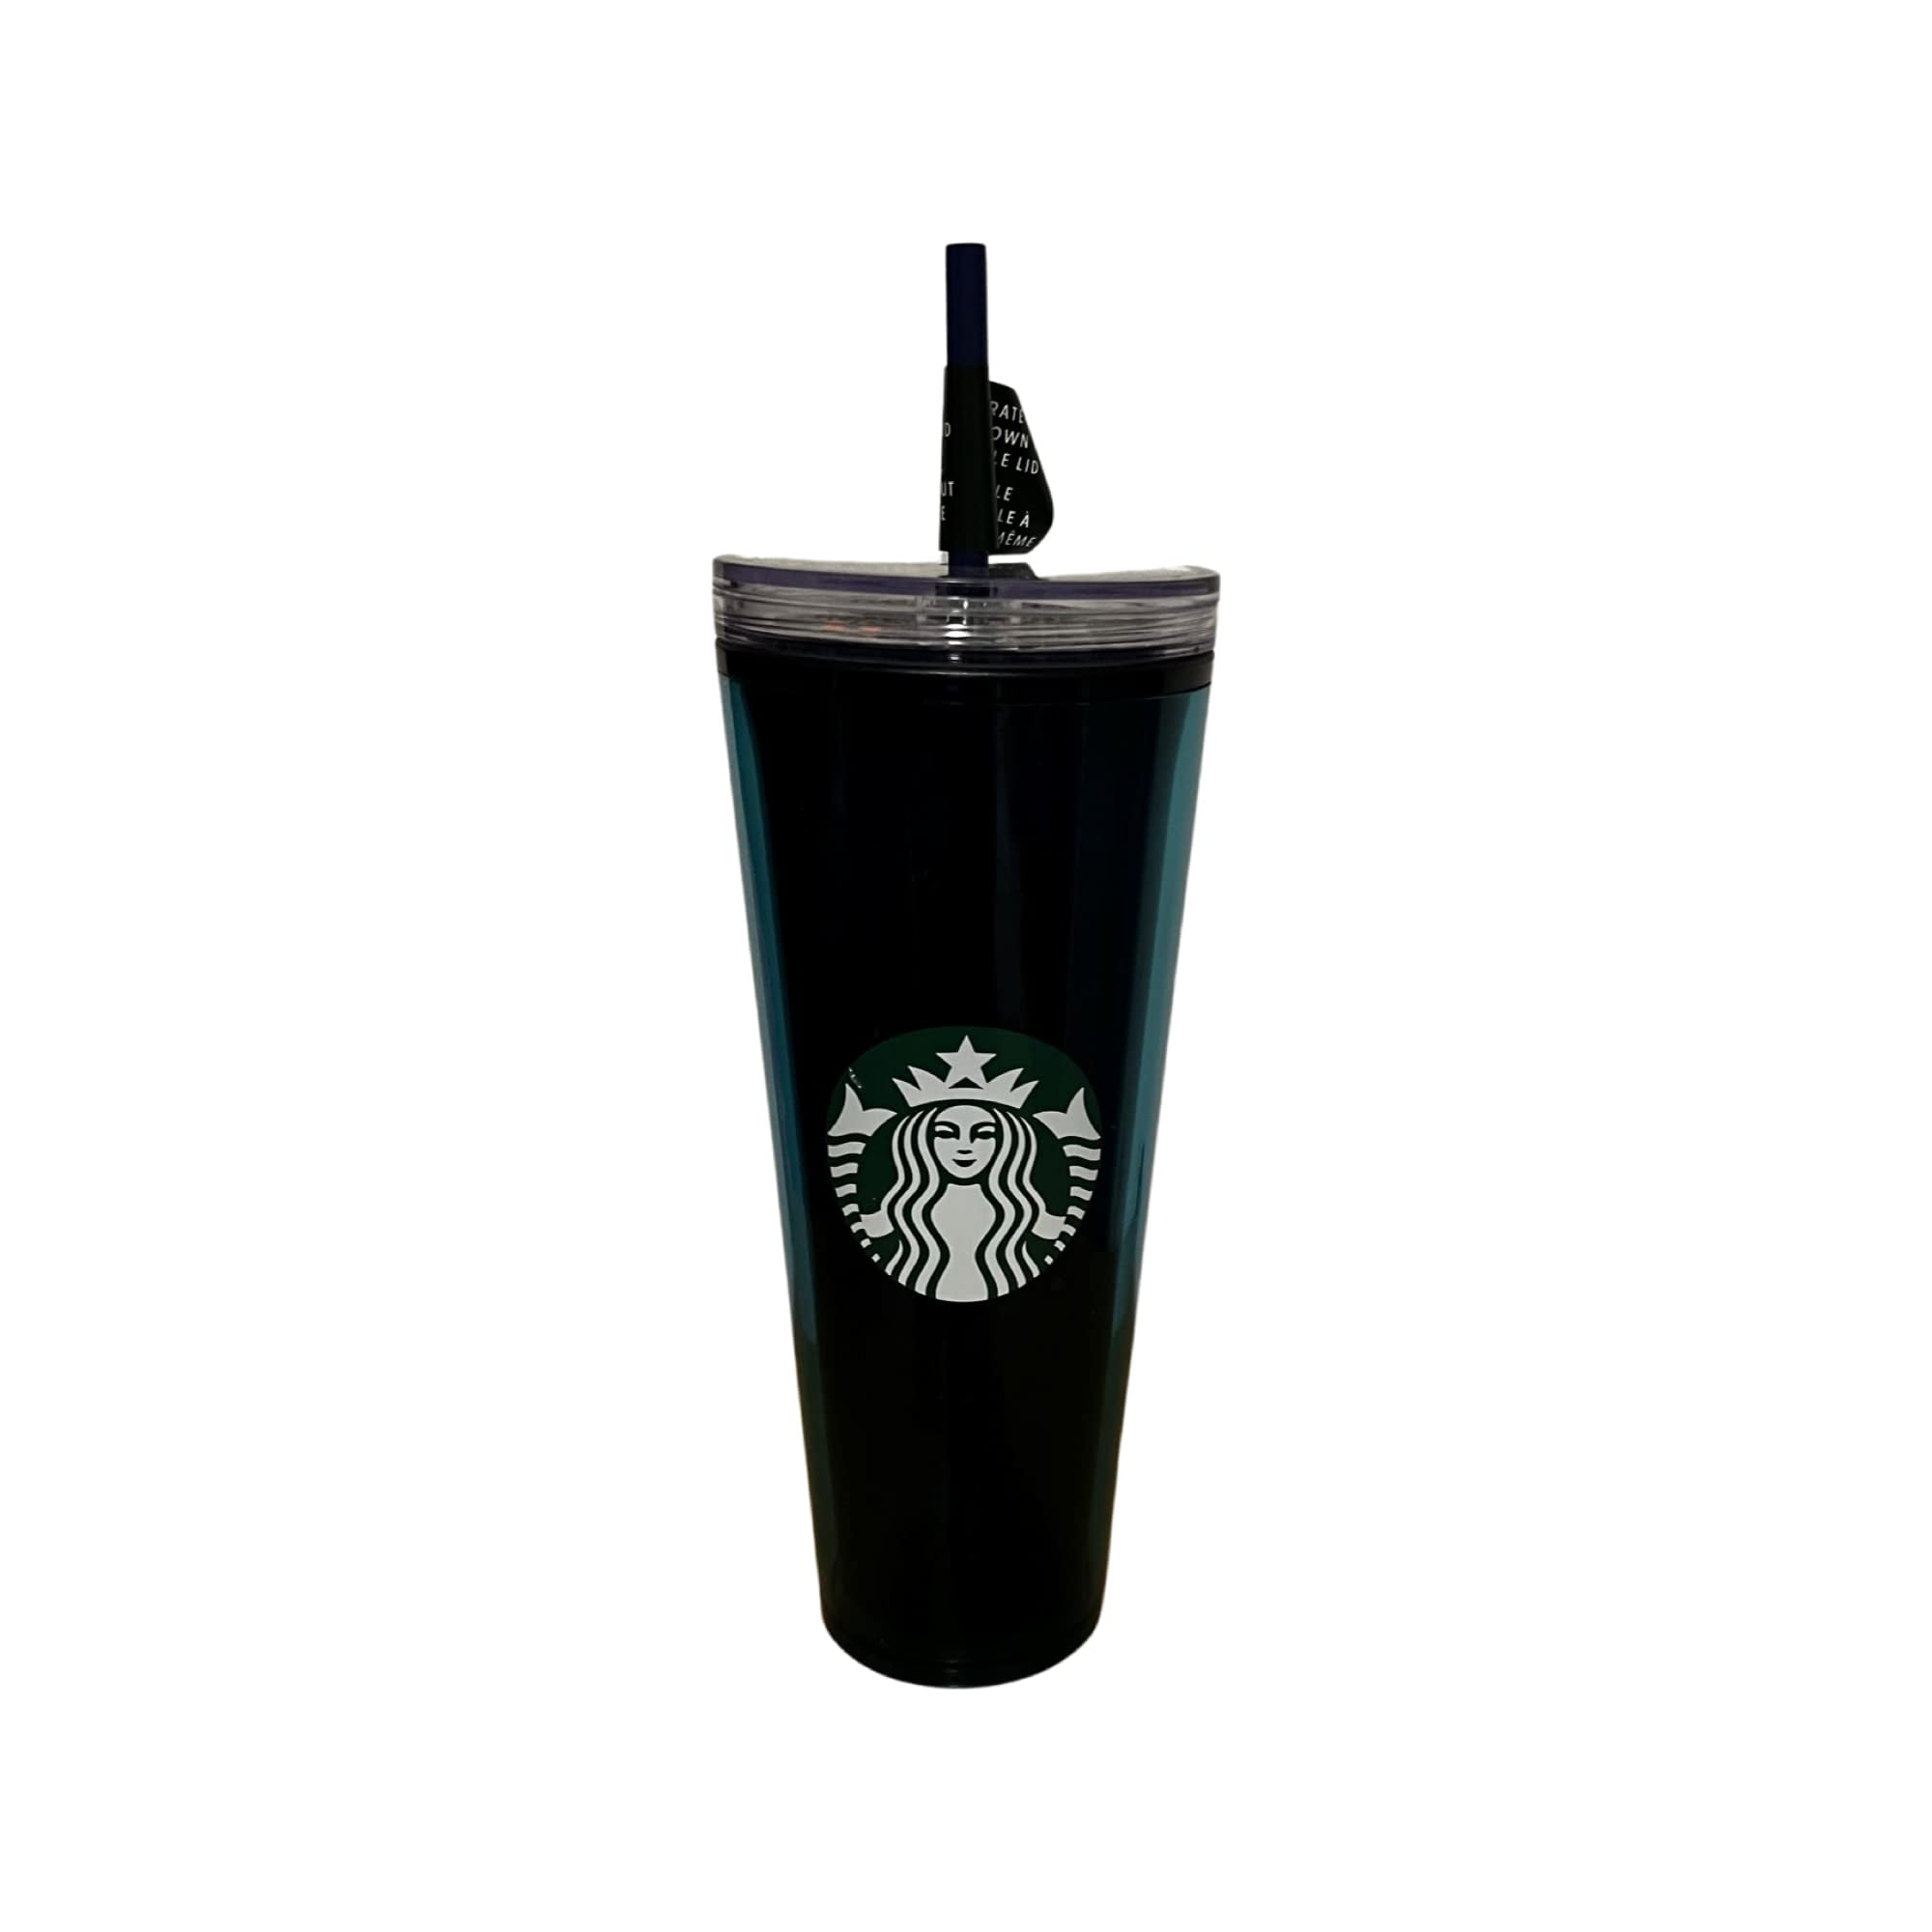 Starbucks, Kitchen, New Starbucks Clear Acrylic Cold Tumbler Cup